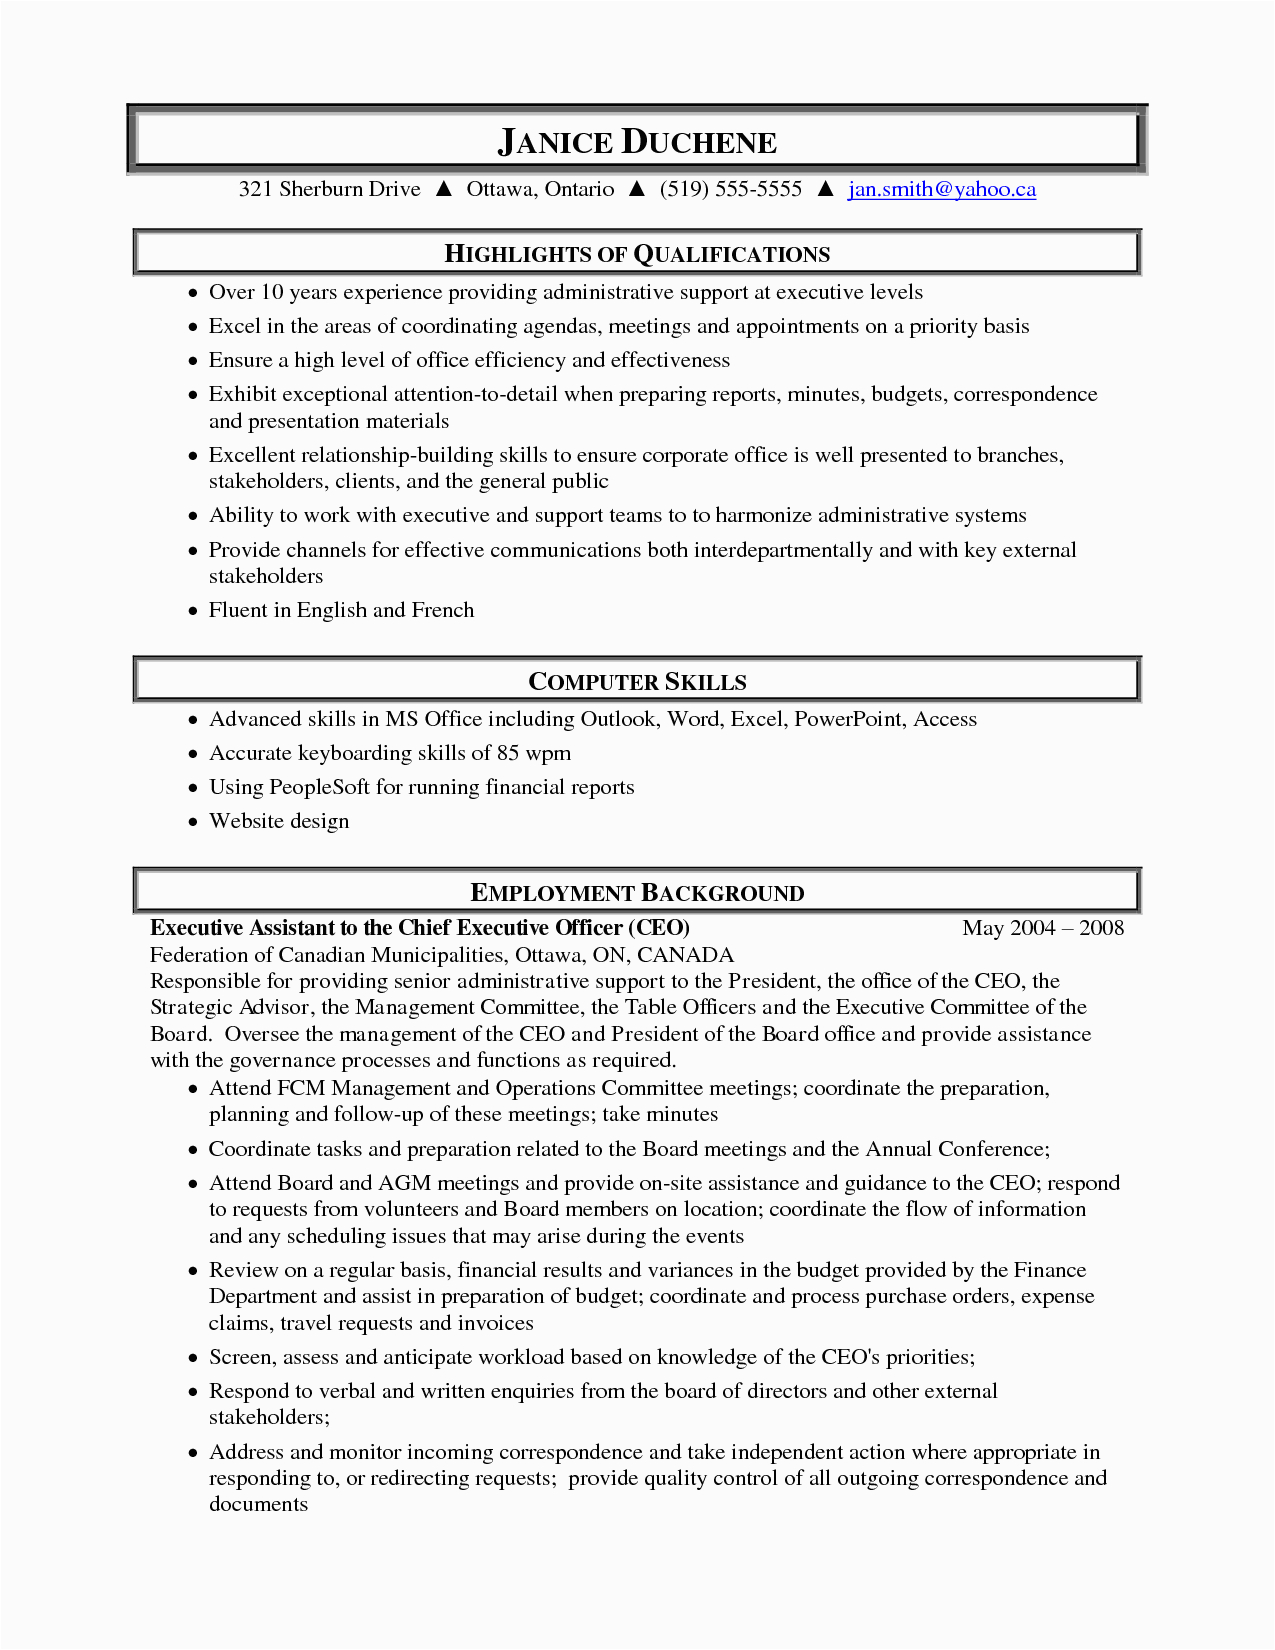 Medical Office Administrative assistant Resume Sample Medical Administrative assistant Resume Samples Highlight